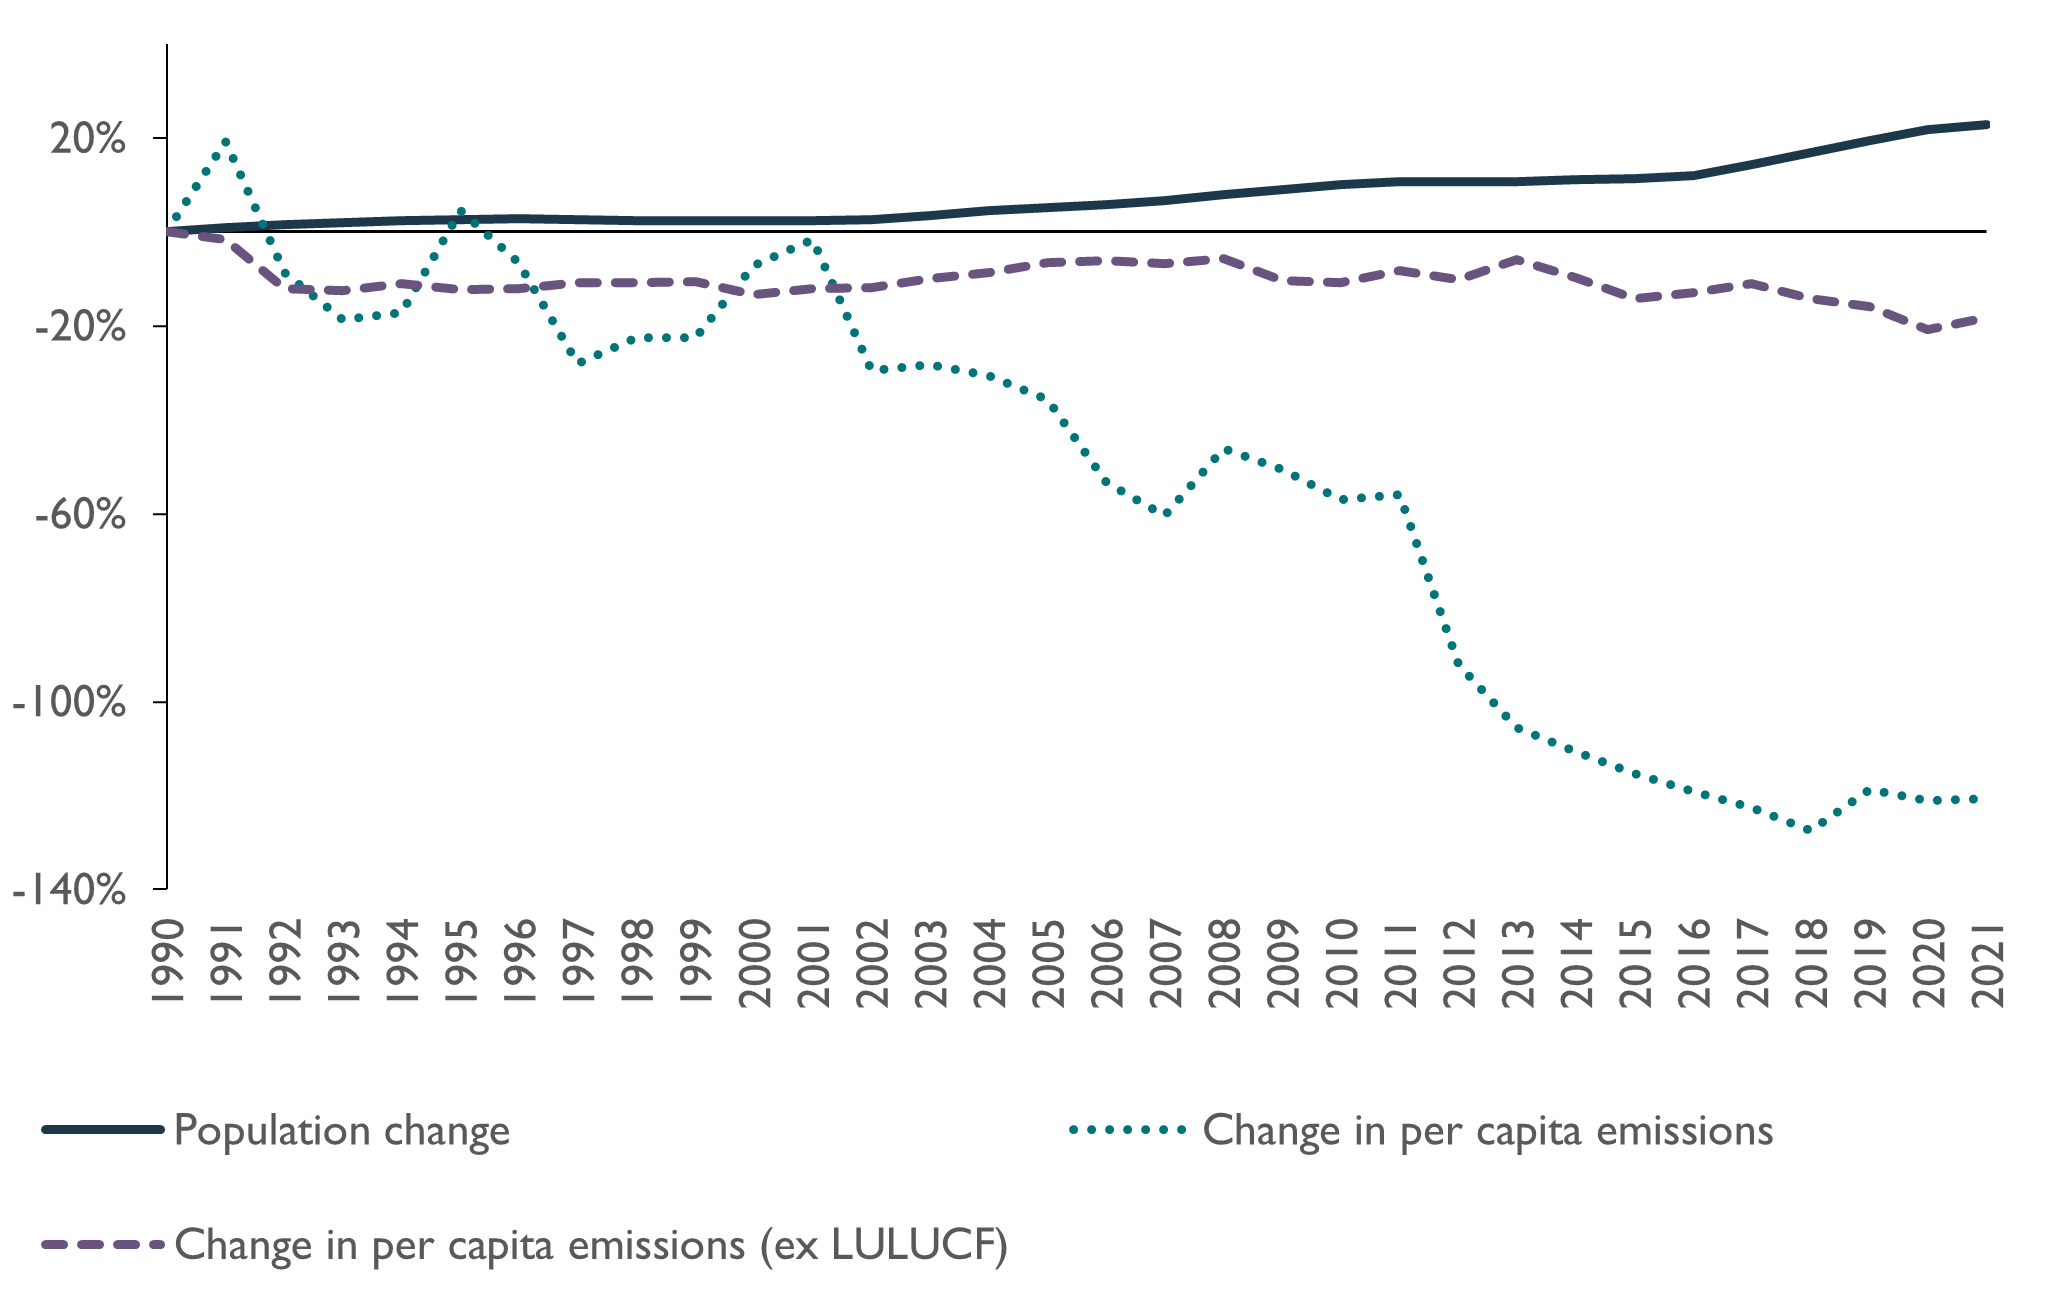 This figure is a line chart showing the percentage change in Tasmania’s population and emissions per person, with and without the LULUCF sector, from 1990 to 2021. The solid line shows Tasmania’s population has steadily grown, having increased by 22.9 per cent between 1990 and 2021. When emissions from the LULUCF sector are included, the change in emissions per person shows some fluctuations but a general downwards trend to a decline of 120.7 per cent in 2021. When emissions from the LULUCF sector are excluded, the percentage change in Tasmania’s emissions per person declines marginally. In 2021, the graph shows a decrease in emissions of 18.3 per cent per person (excluding LULUCF) relative to the 1990 baseline. 